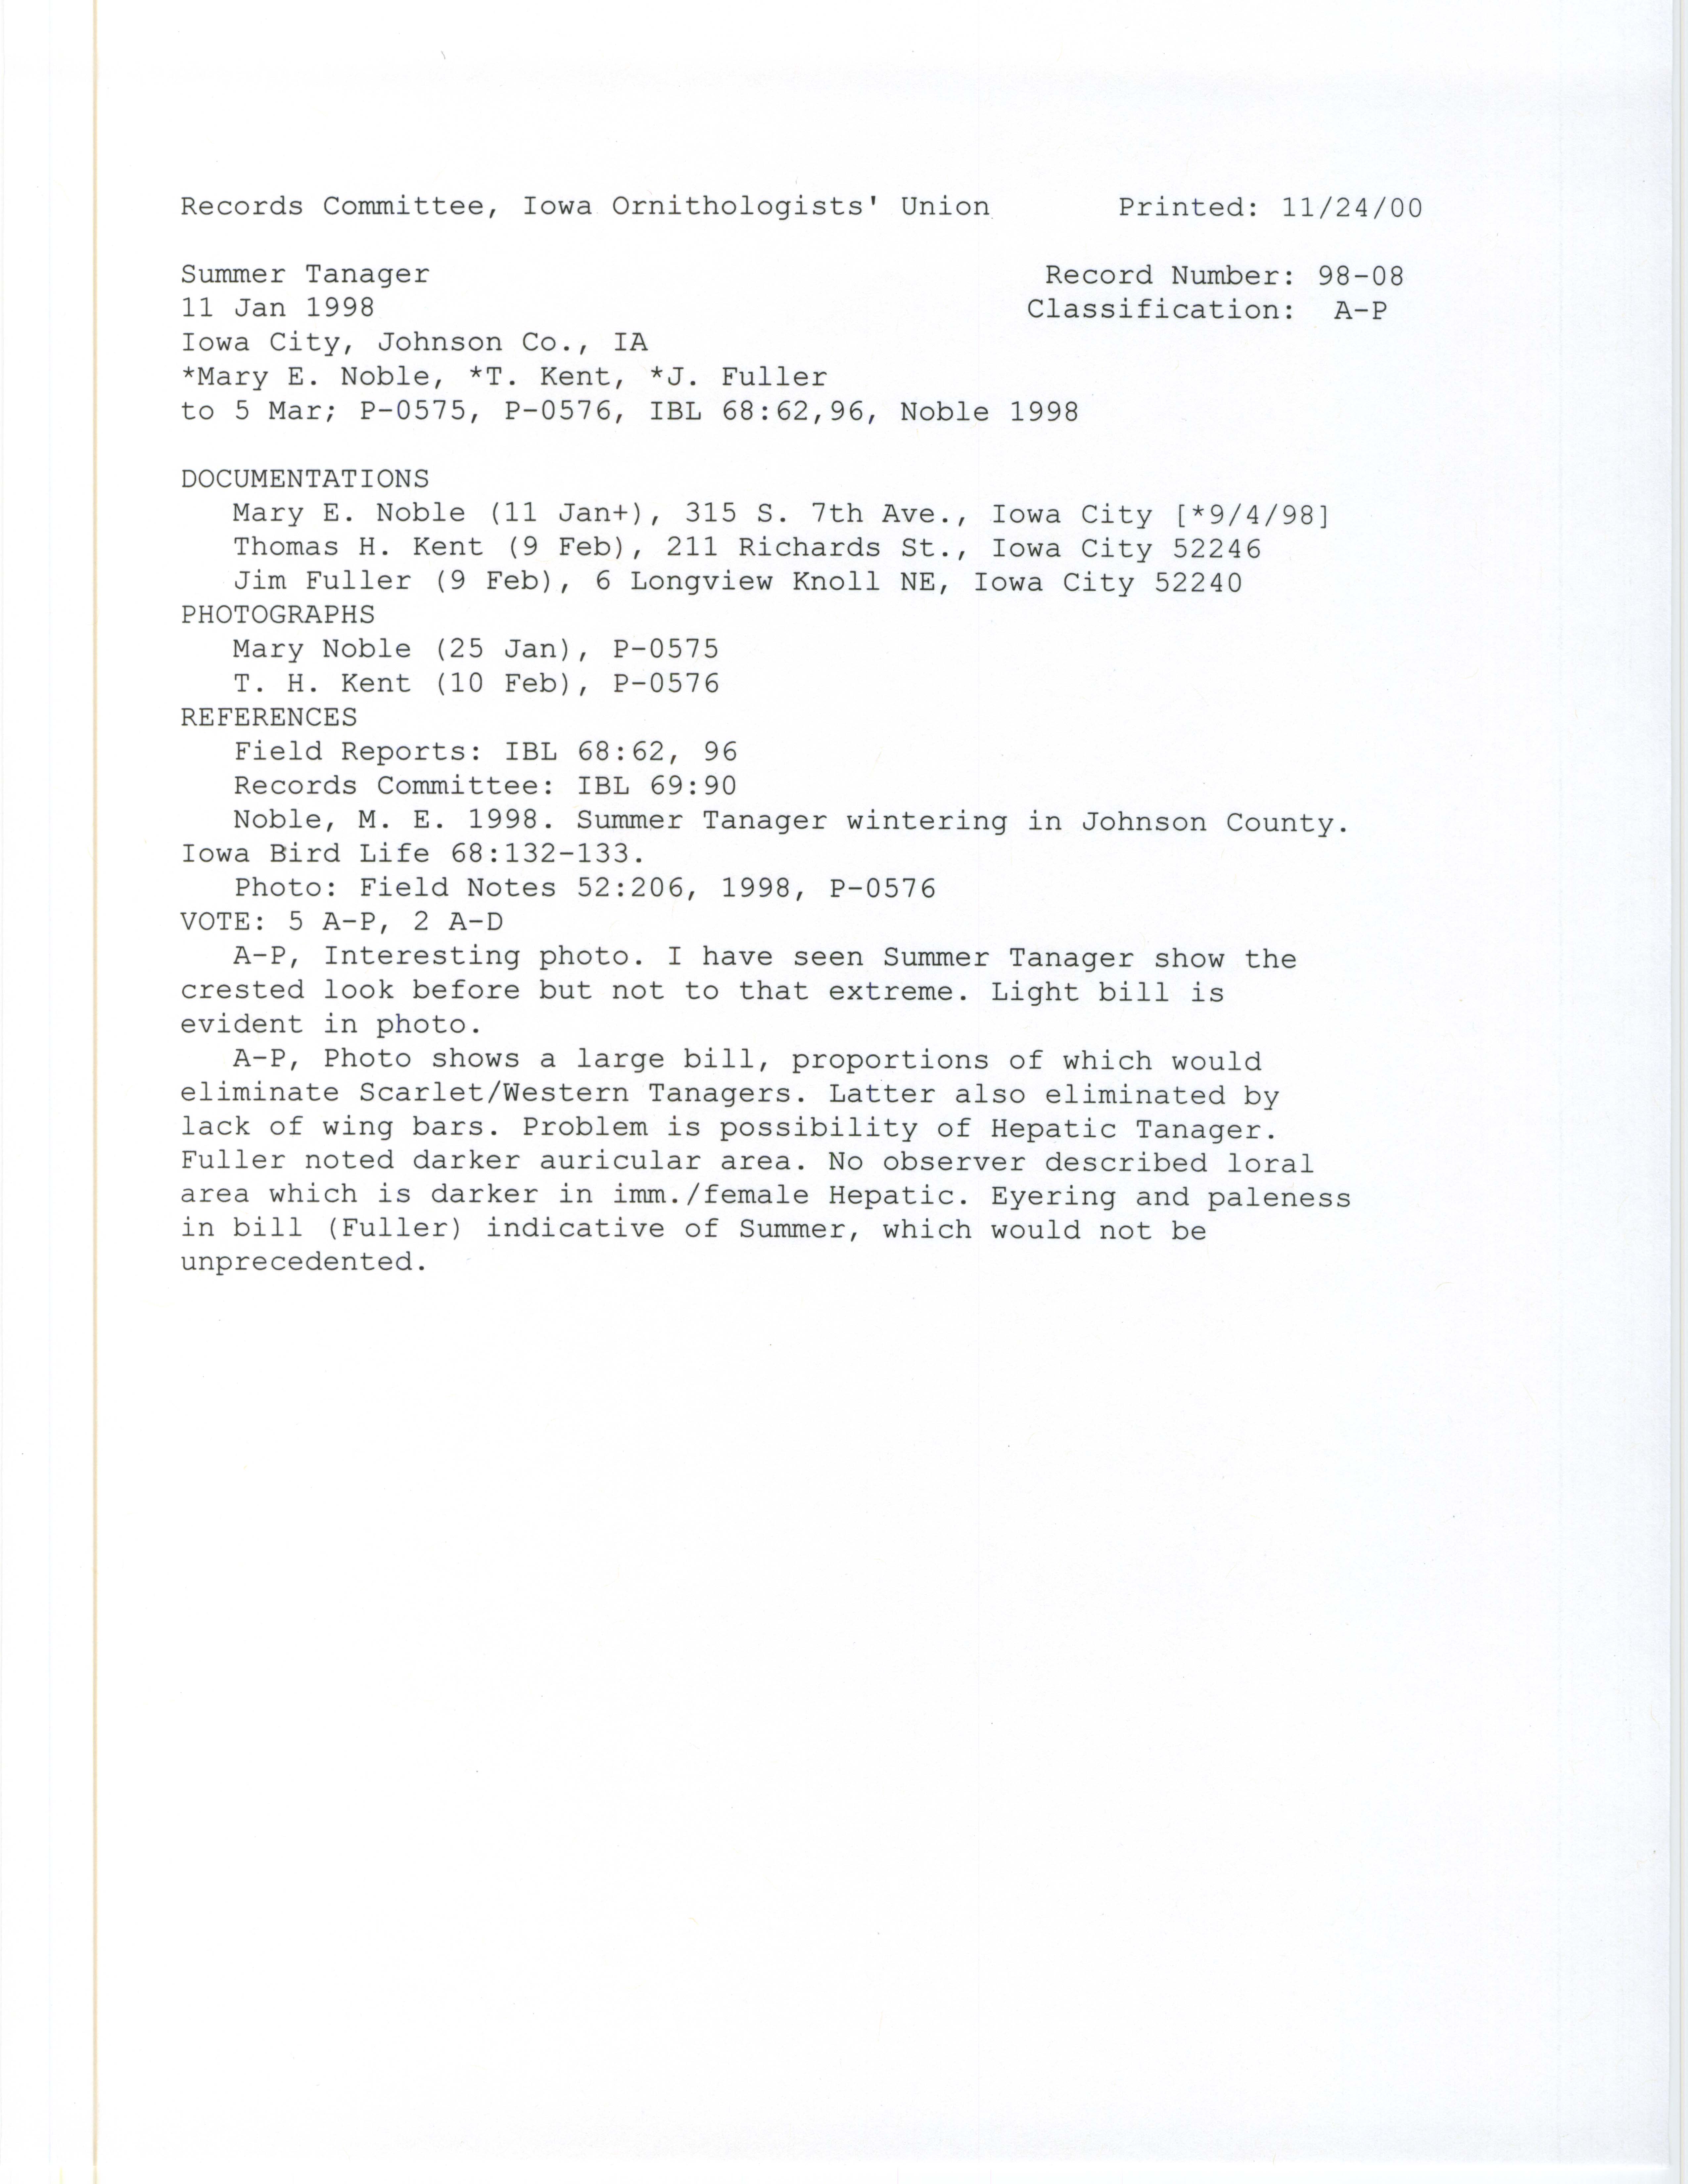 Records Committee review for rare bird sighting for Summer Tanager at Iowa City, 1998